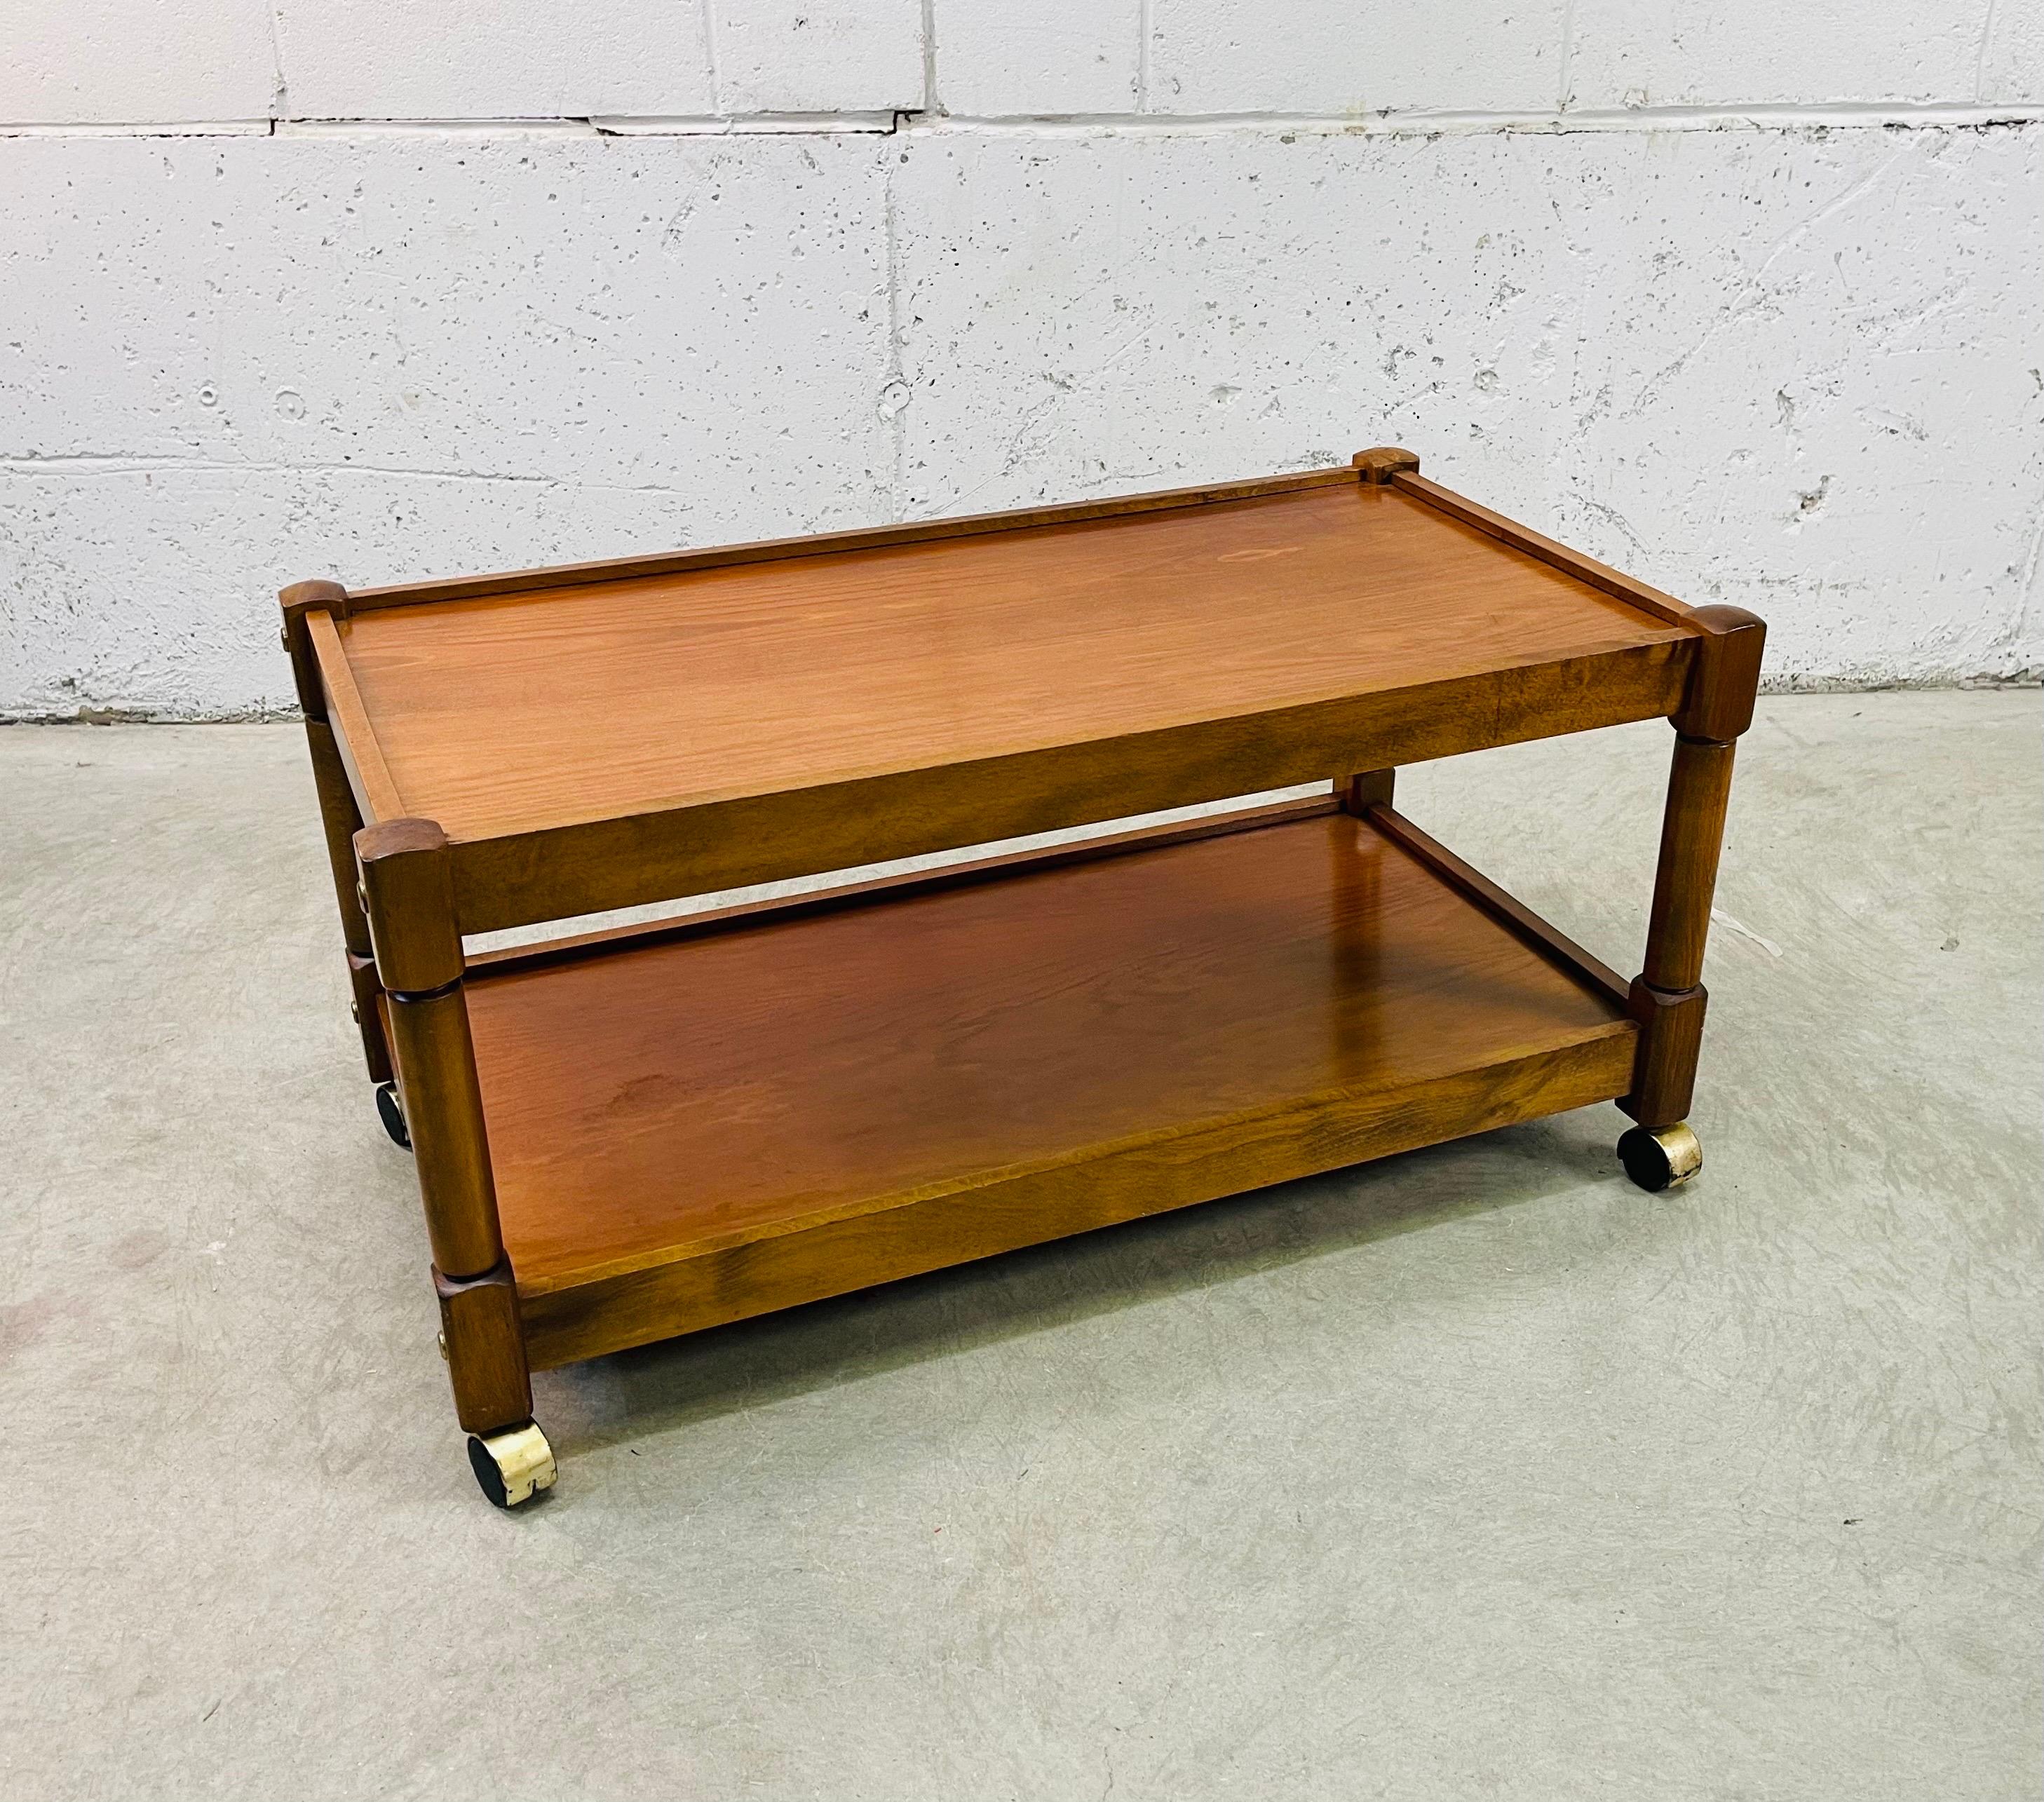 Vintage 1960s two-tier mahogany rectangular rolling serving cart. The cart has two shelves for storage and rolls freely. The cart has gold metal accents. Marked Romania.